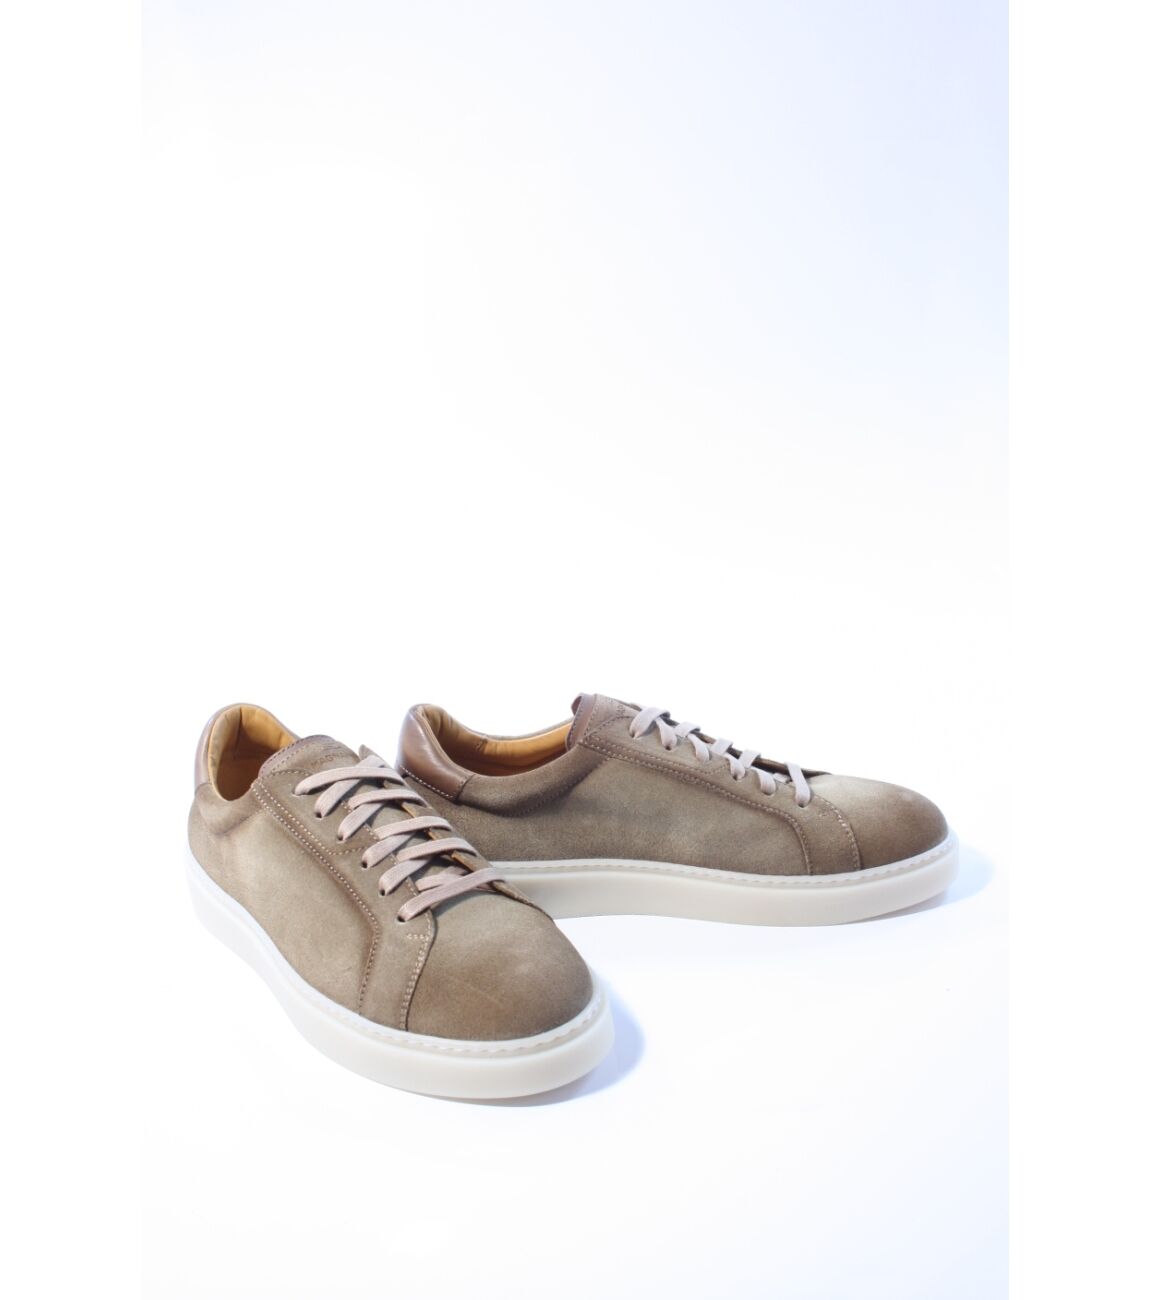 Magnanni Heren sneakers taupe 40